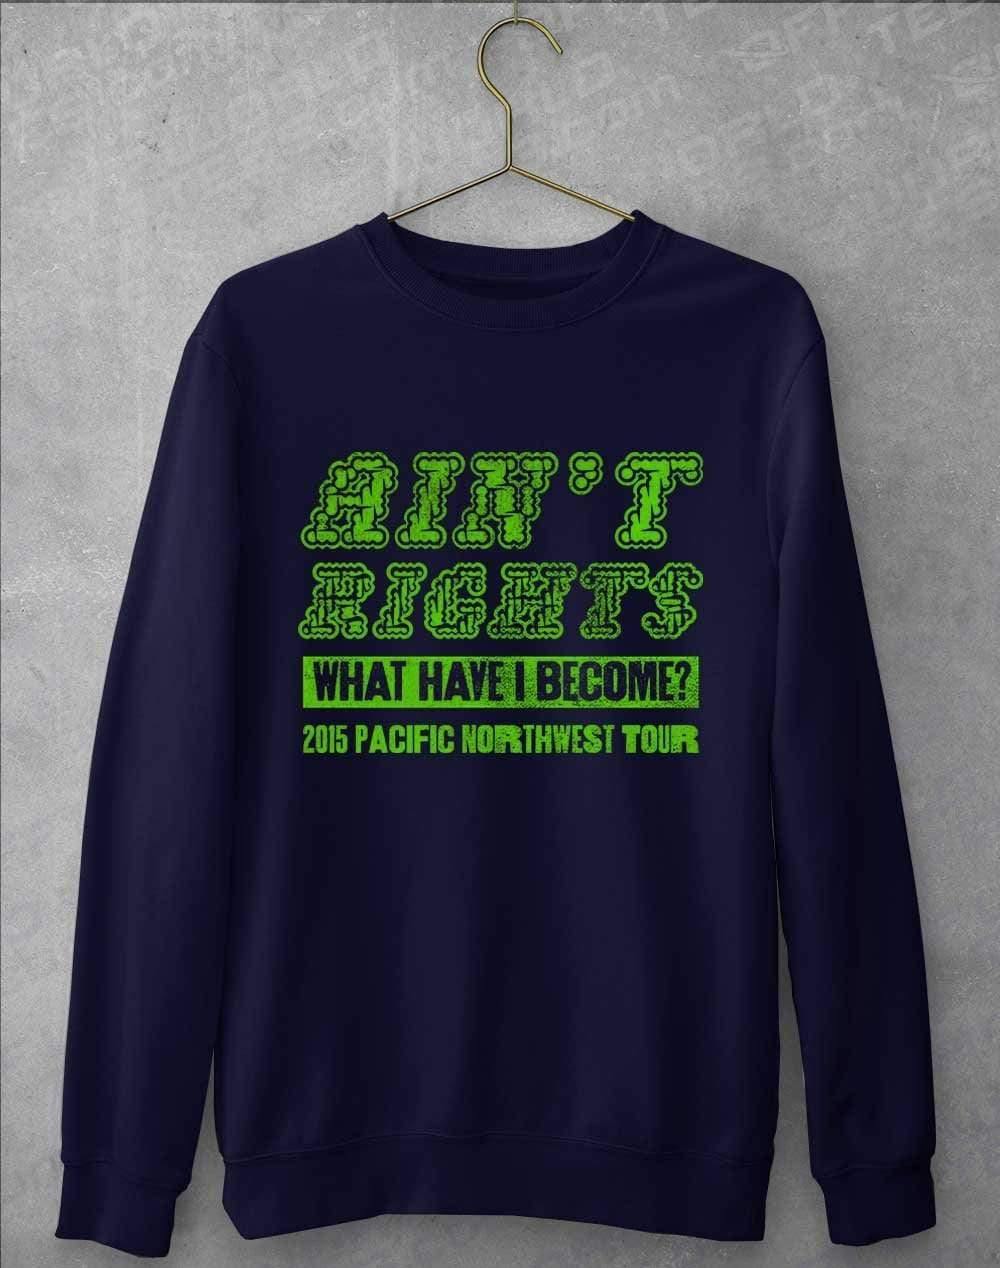 Ain't Rights 2015 Tour Sweatshirt S / Oxford Navy  - Off World Tees